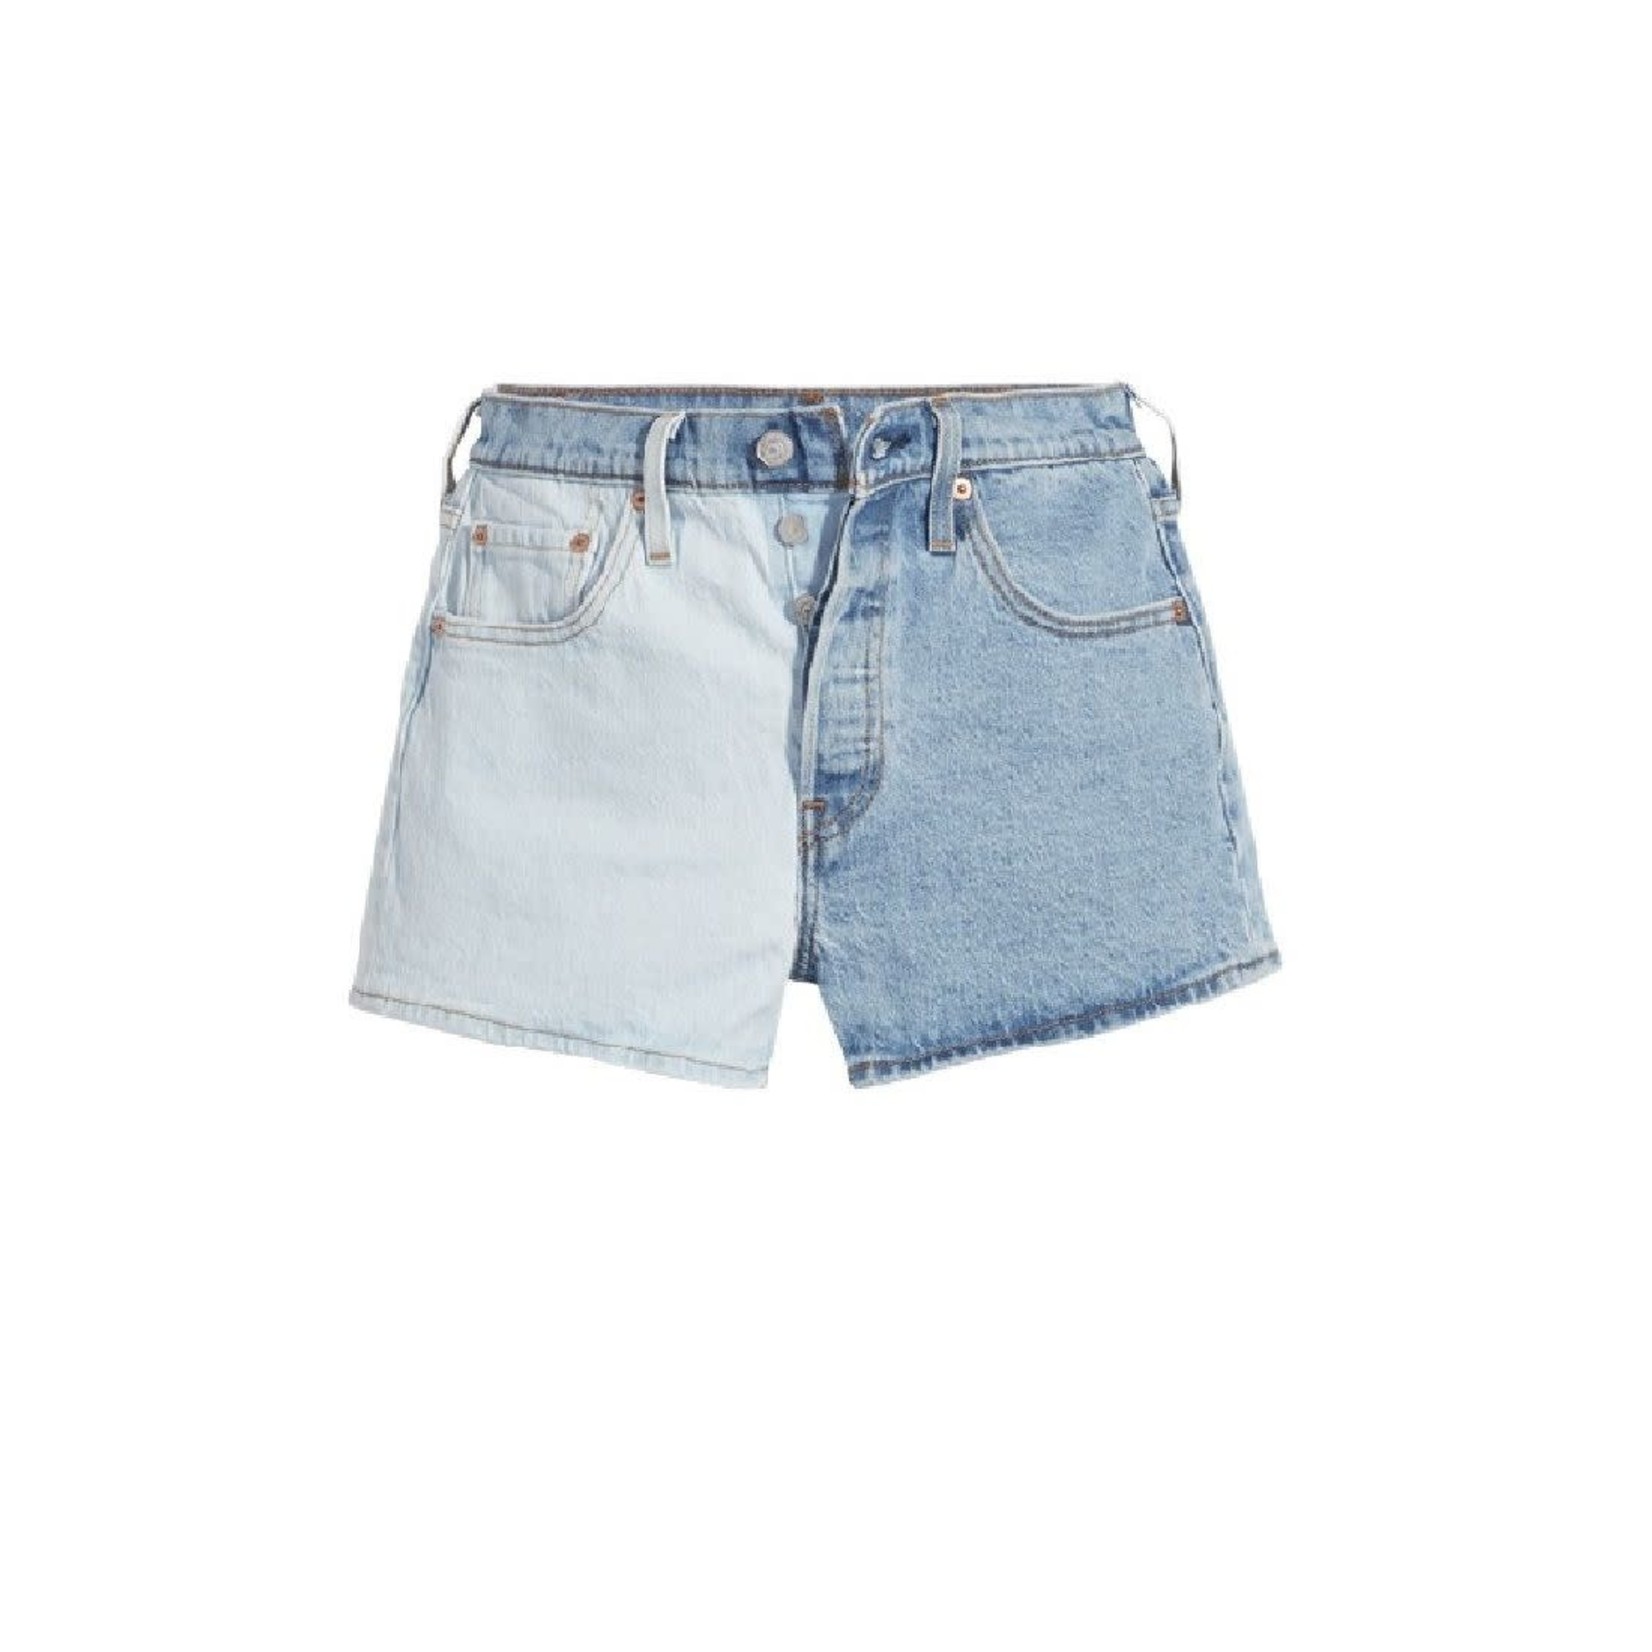 Levi's 501 Original Shorts Of Two Minds